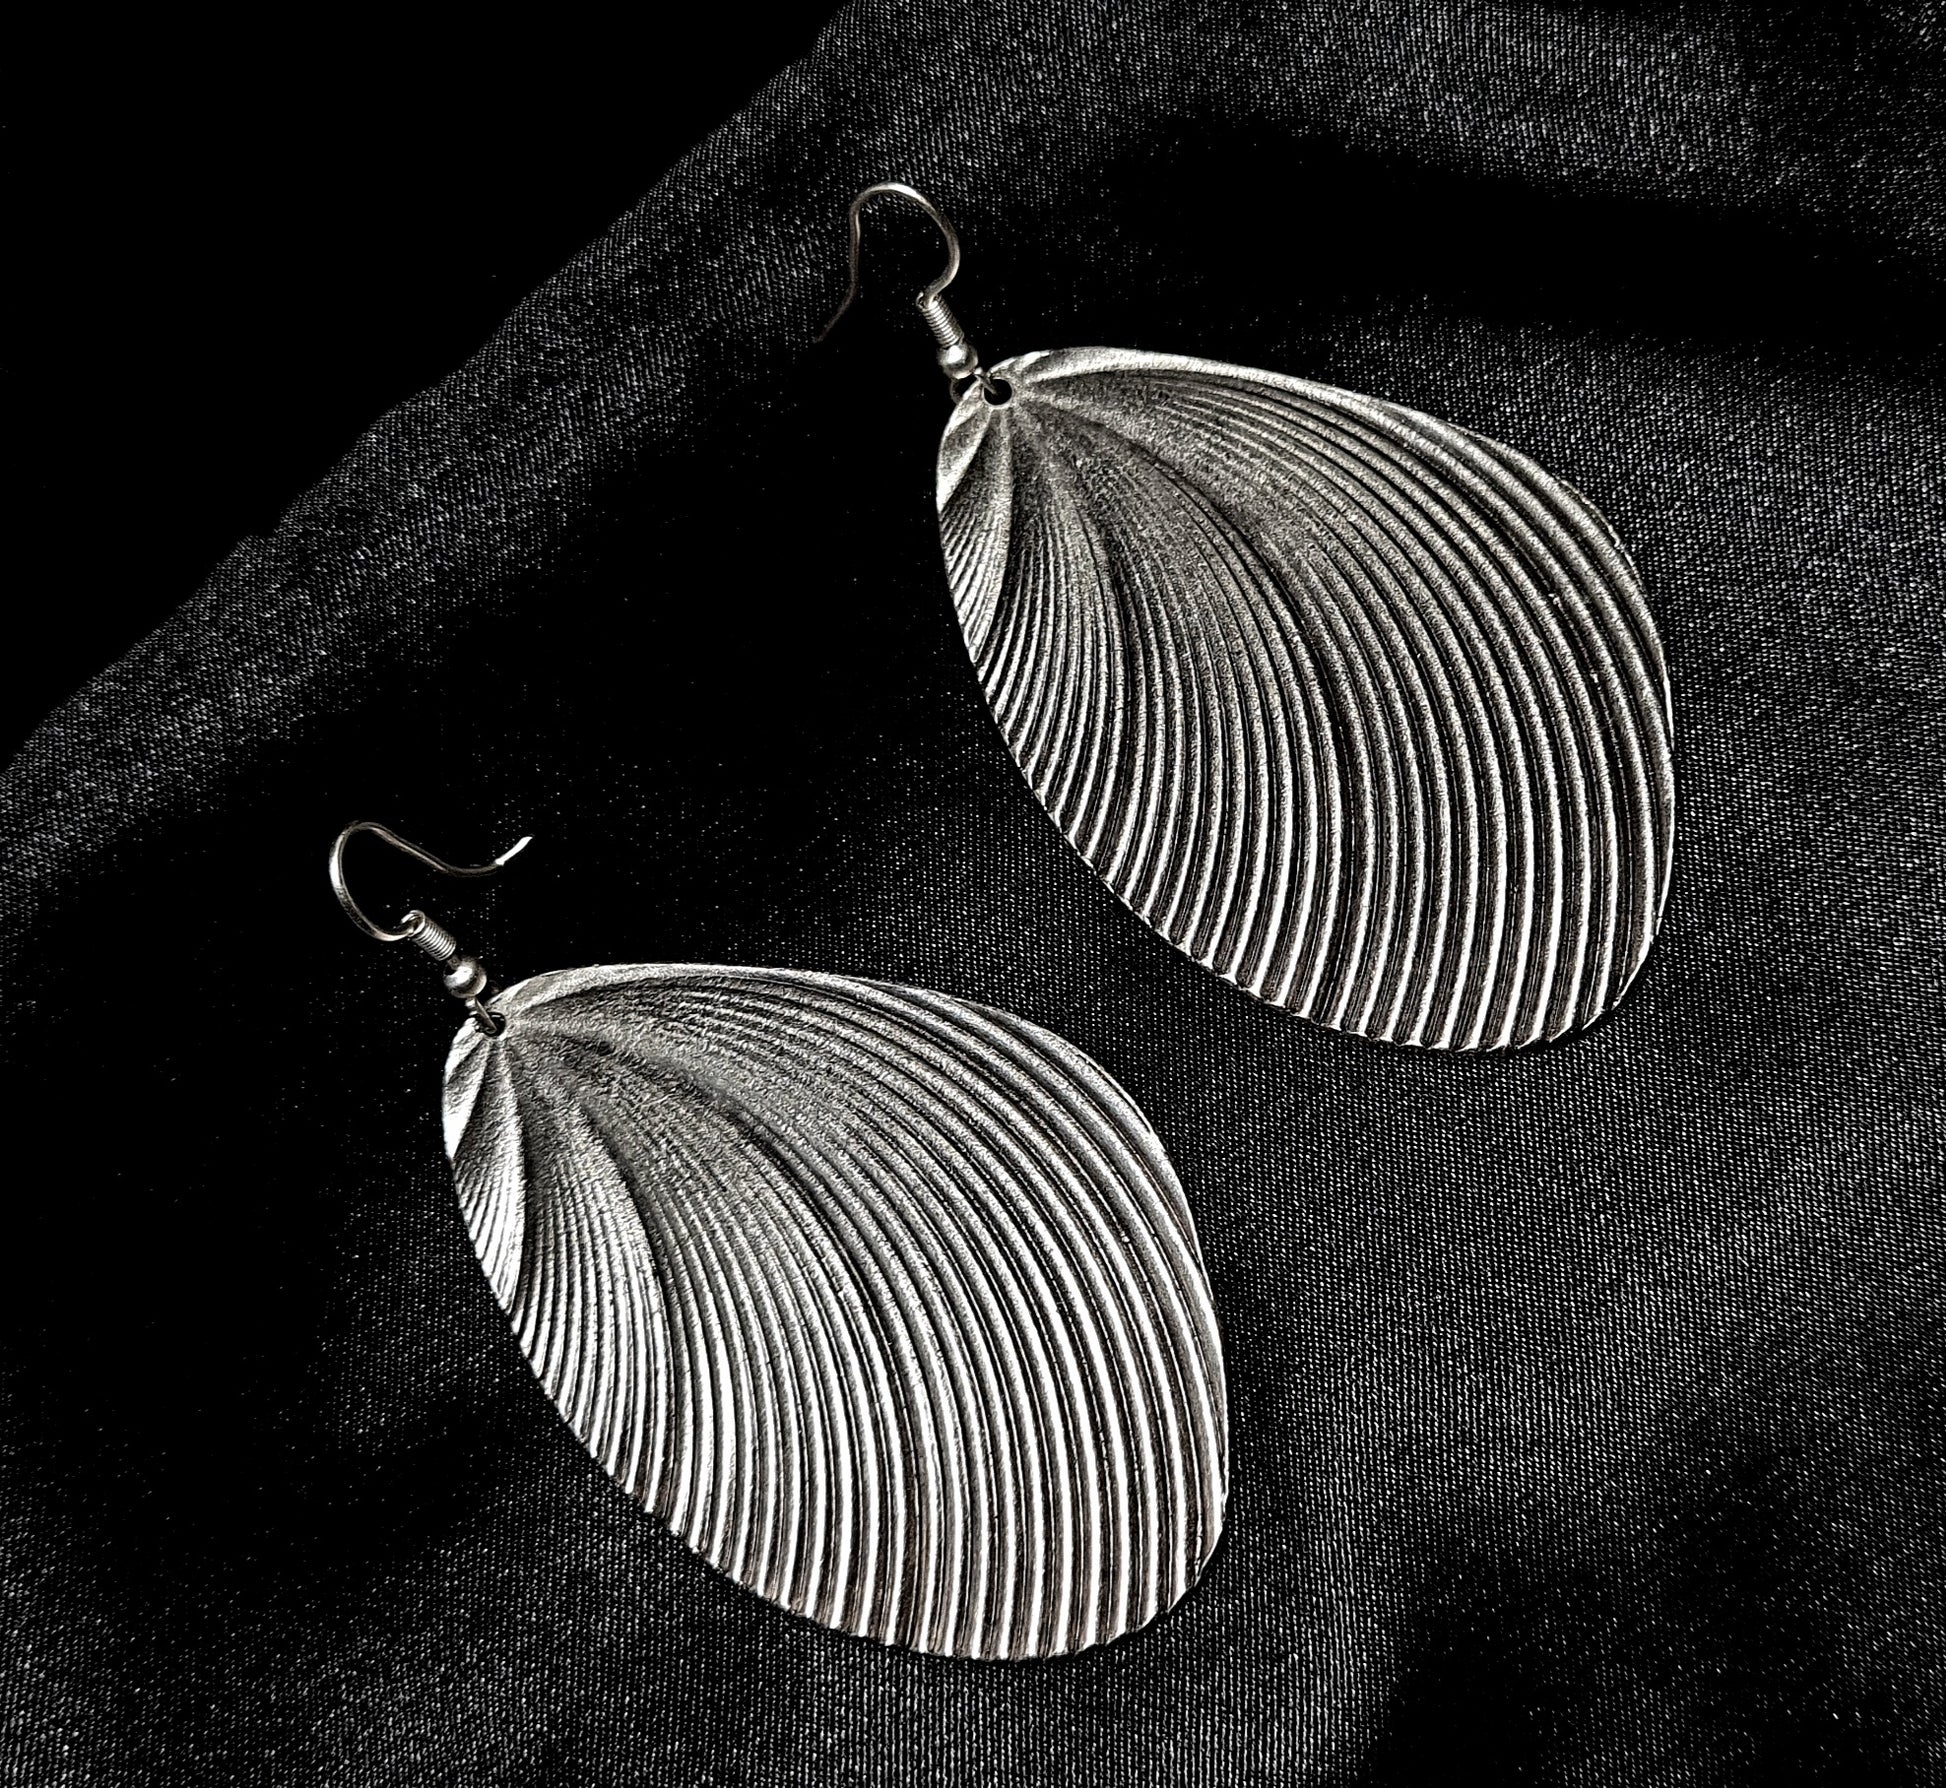 A pair of silver earrings with a shell design sitting on a black cloth. The earrings are small and delicate, and they have a shiny finish. The shell design is in the shape of a seashell, and it has a textured appearance